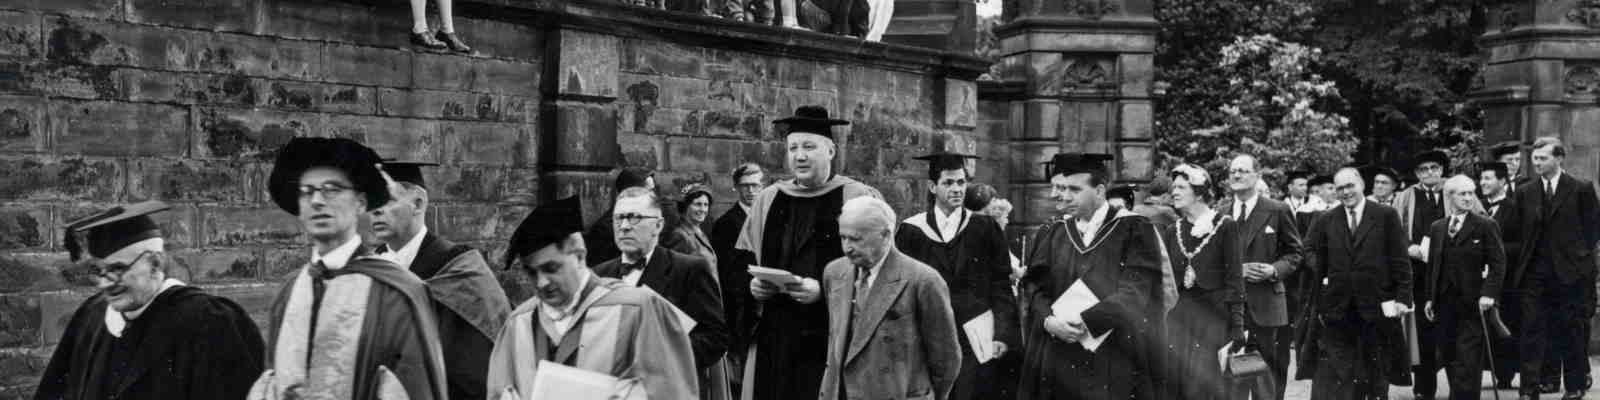 Academic procession in 1950s